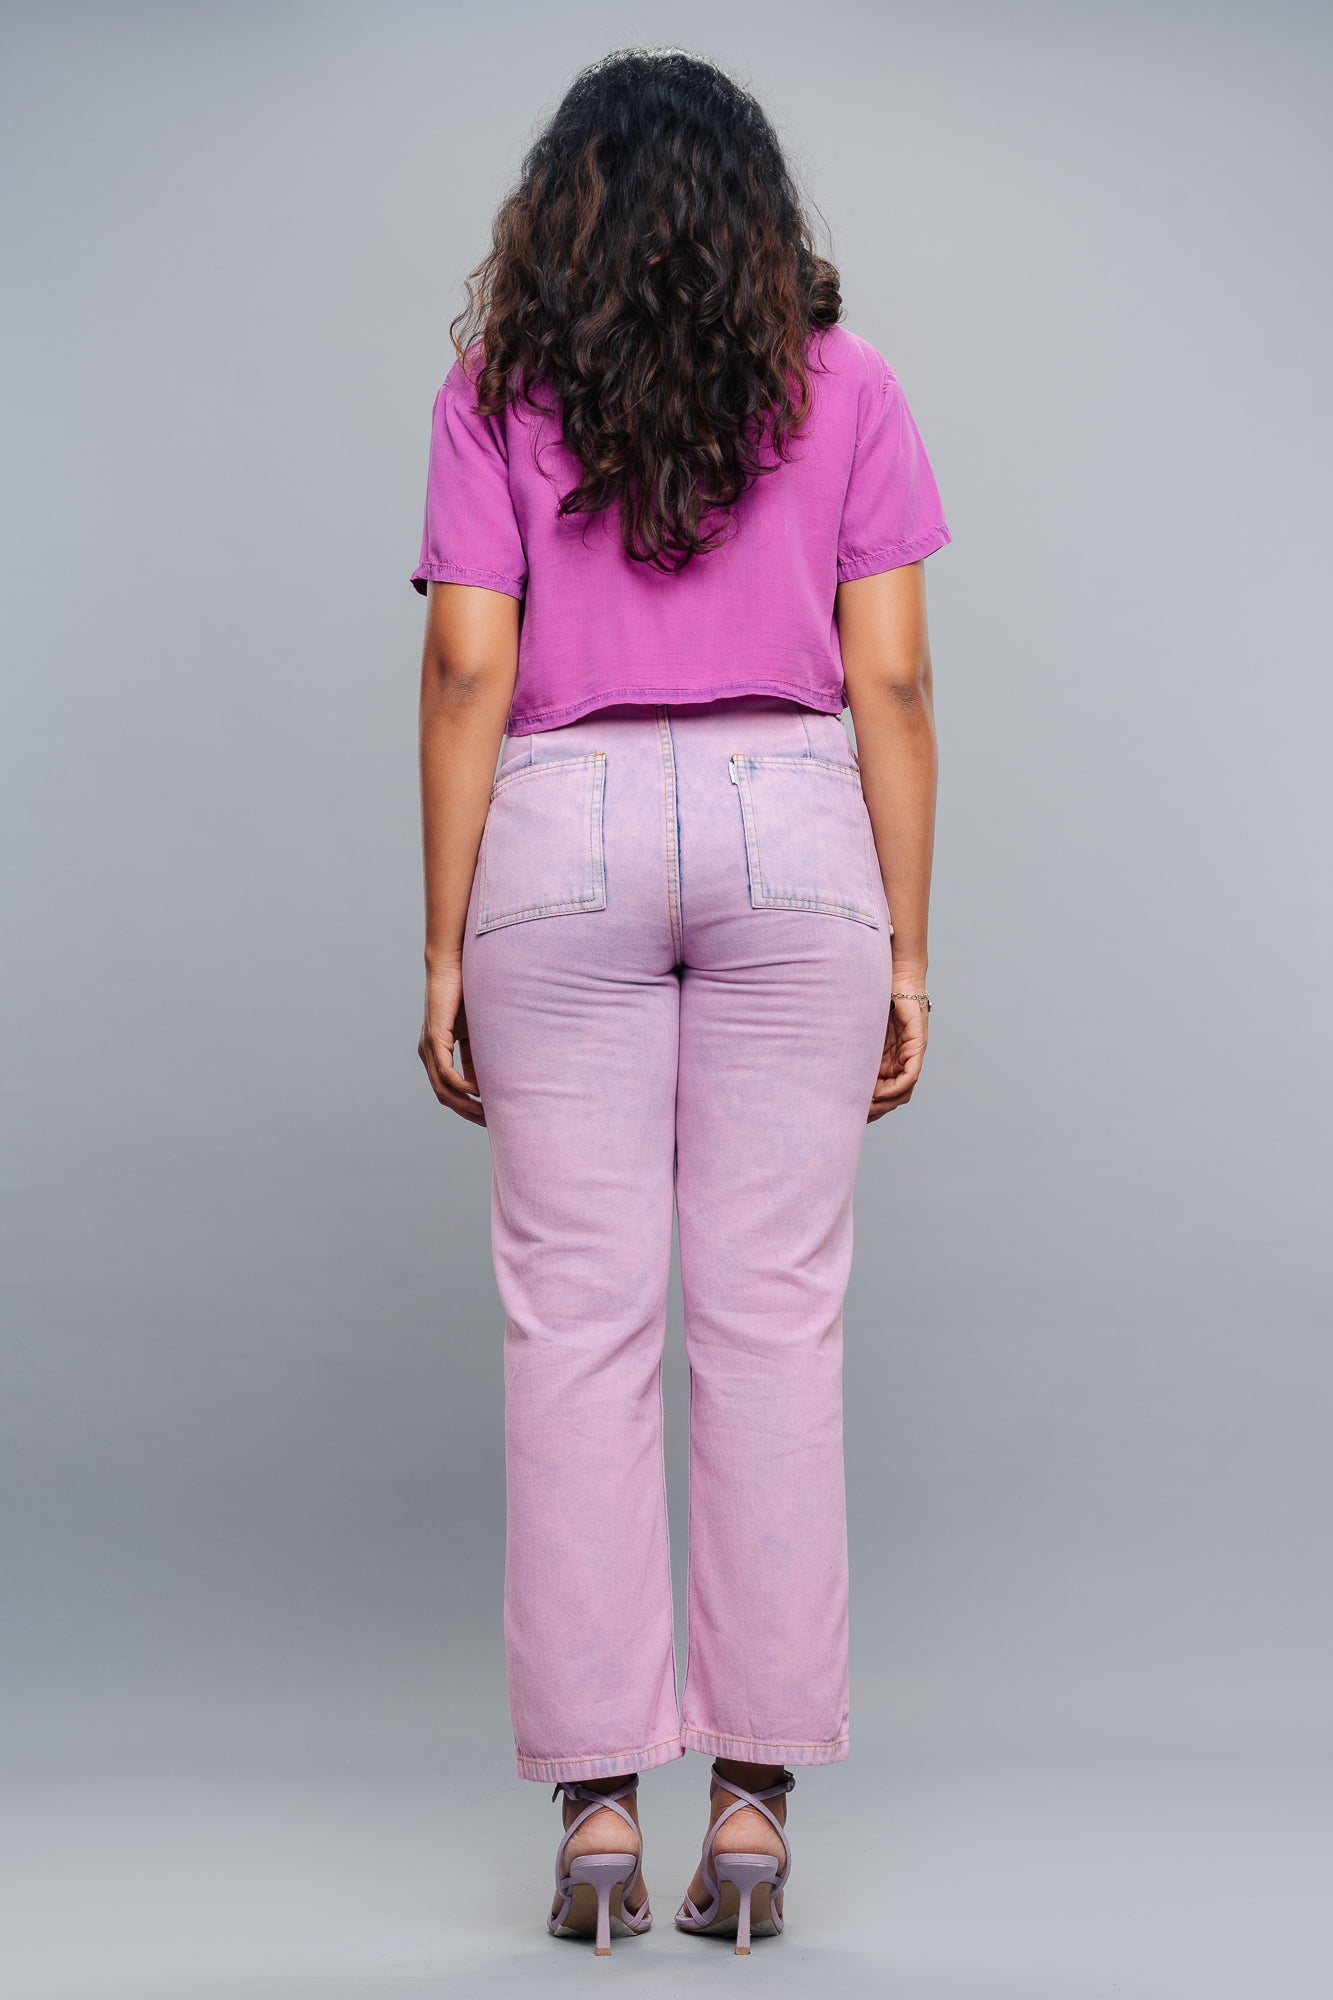 Shop for Straight Fit Jeans for Women Online – Page 2